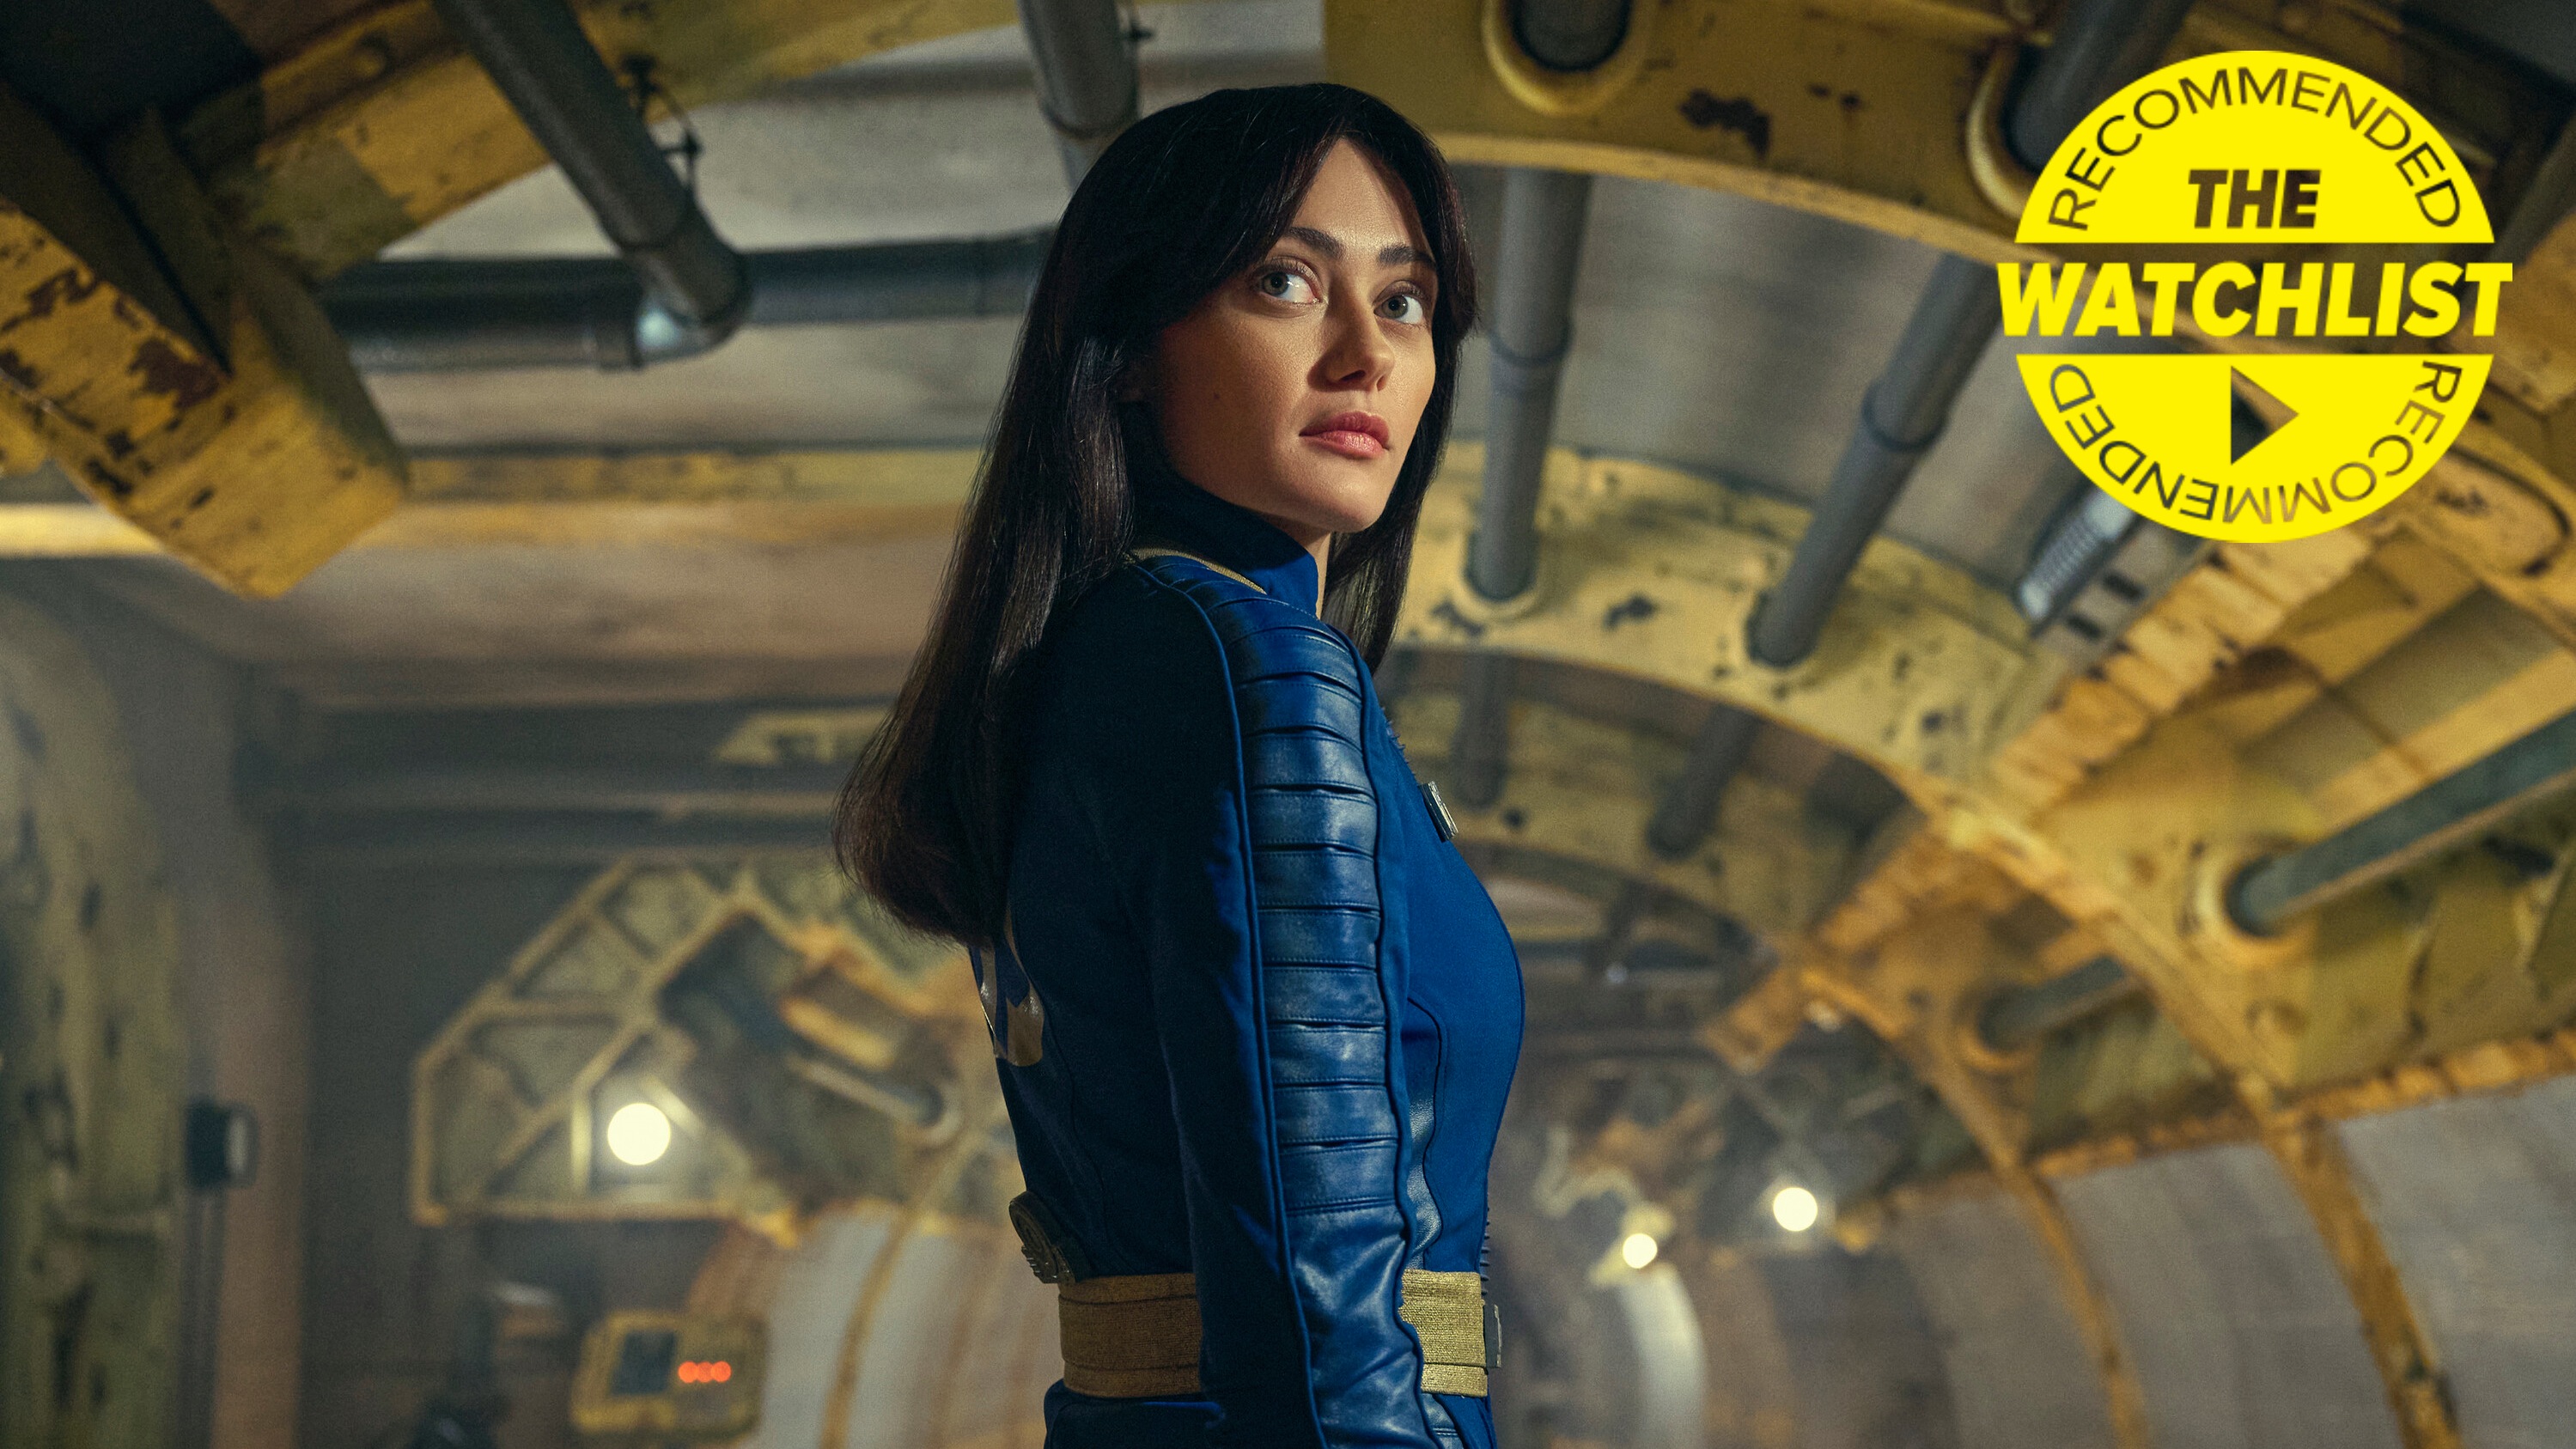 Lucy (Ella Purnell) in Vault 33 in the Fallout TV show, with our yellow Watchlist Recommended badge in the top-right corner of the image